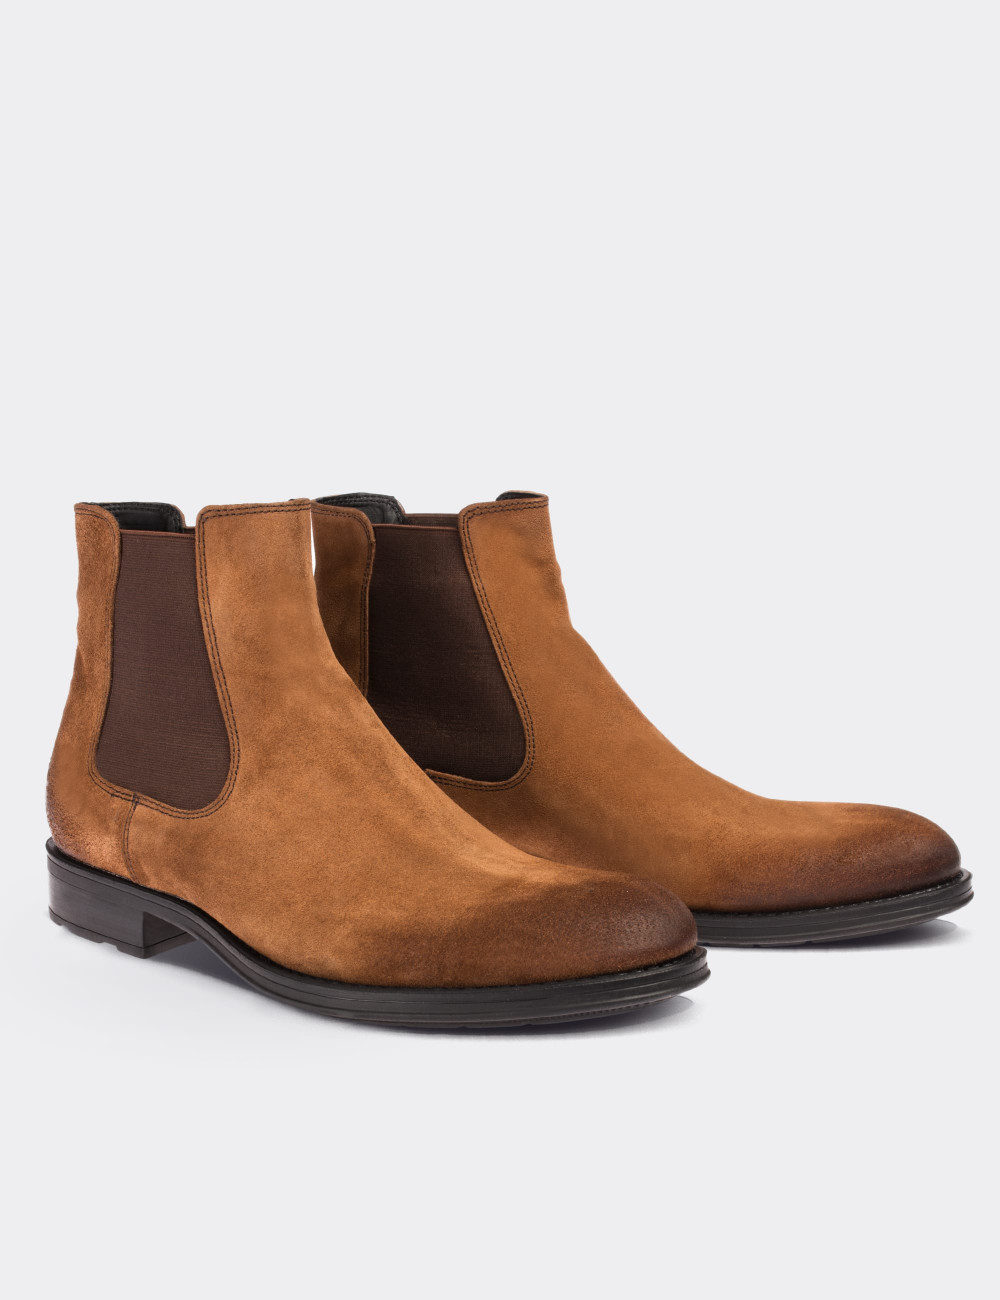 Brown Suede Leather Boots - 01620MTRNC01